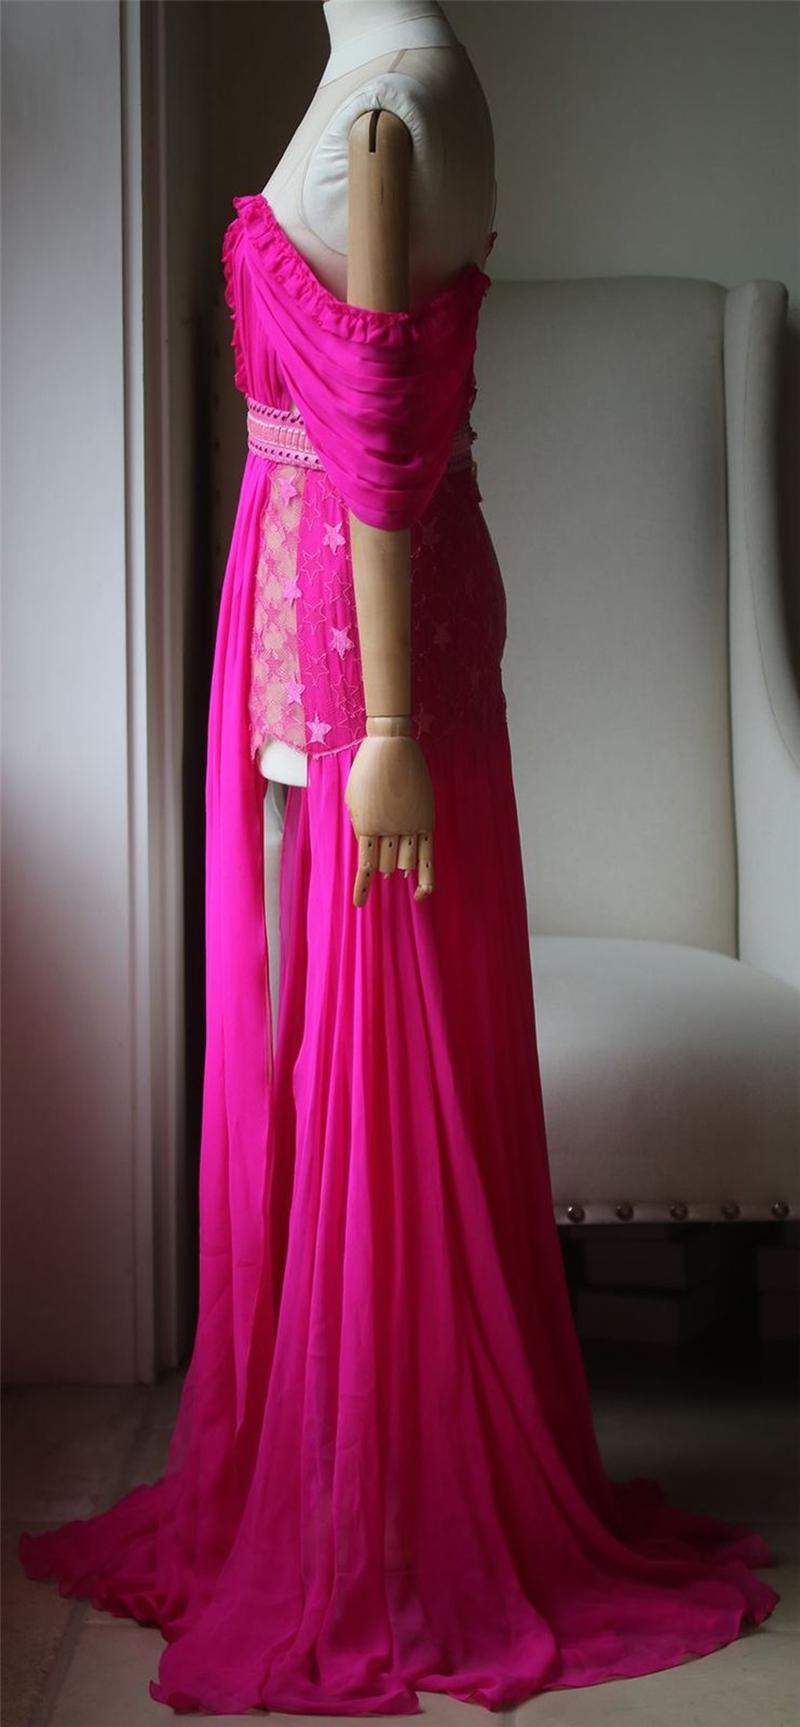 Custom made Aadnevik pink french lace pannels with silk choffon gown. Leather detail around the waist. Tulle cutout detail. Slit details at the front. 100% Silk.

Size: Small (UK 8, US 4, FR 36, IT 40)

Dimensions: Approx. 
Bust: 34 in / 87